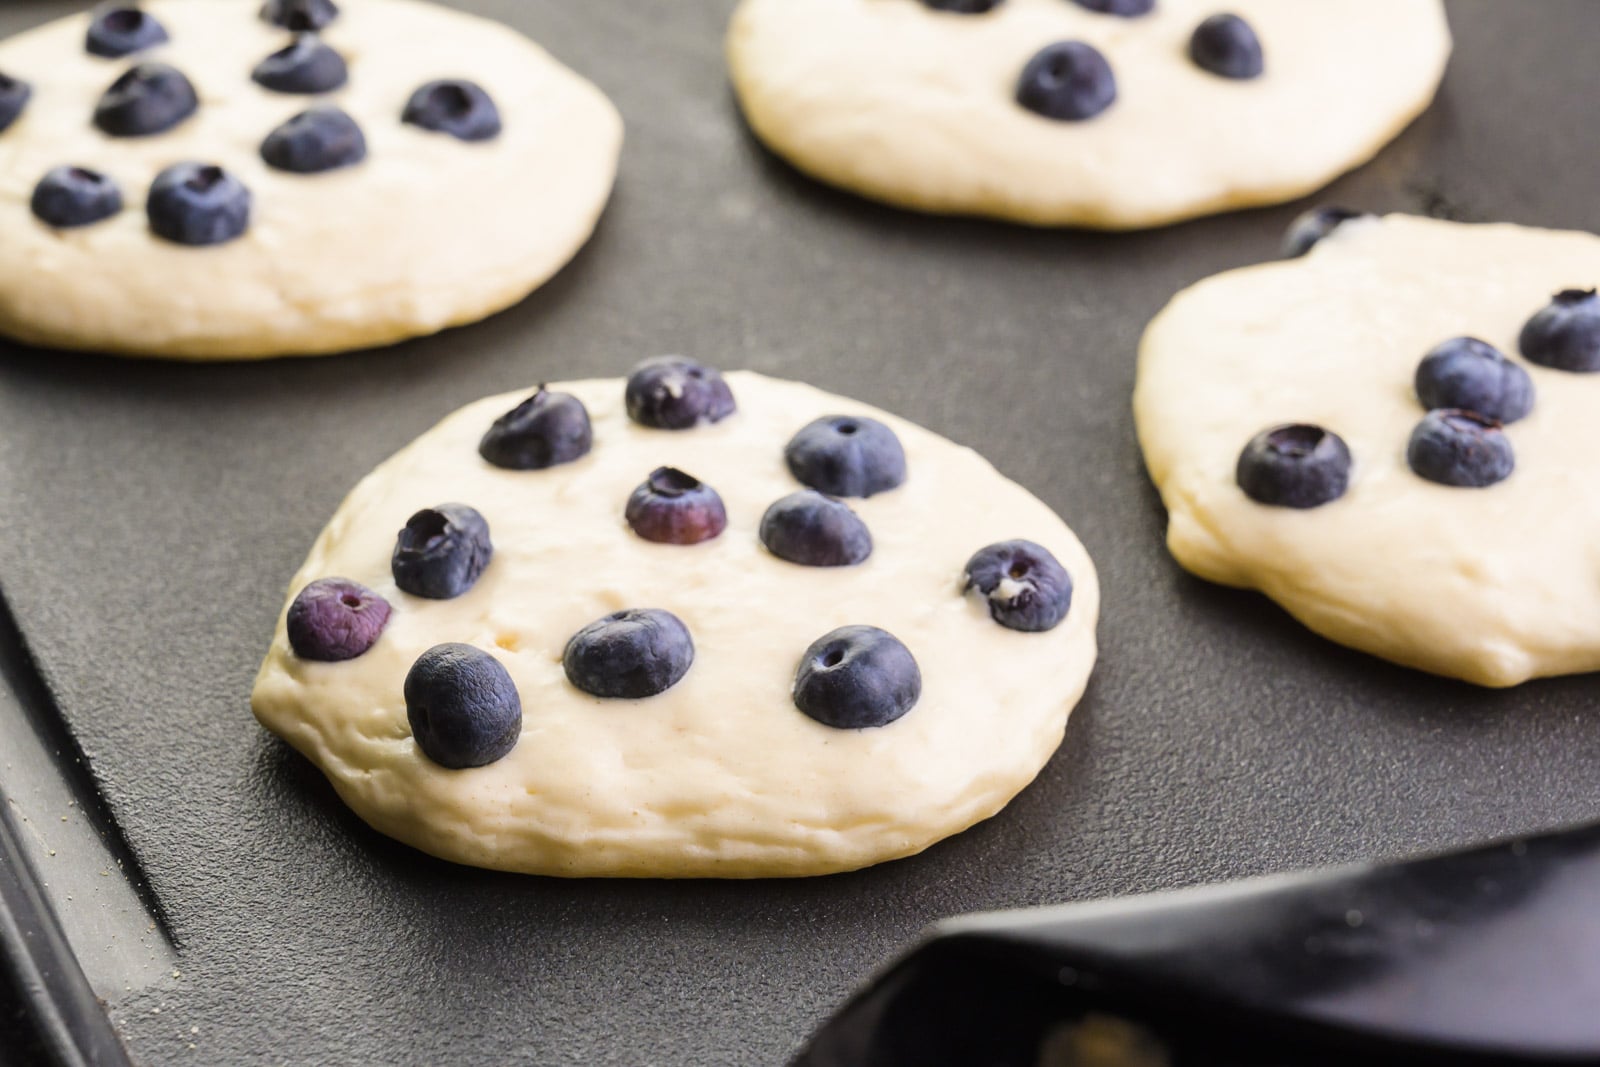 Blueberry pancakes are cooking on a griddle.